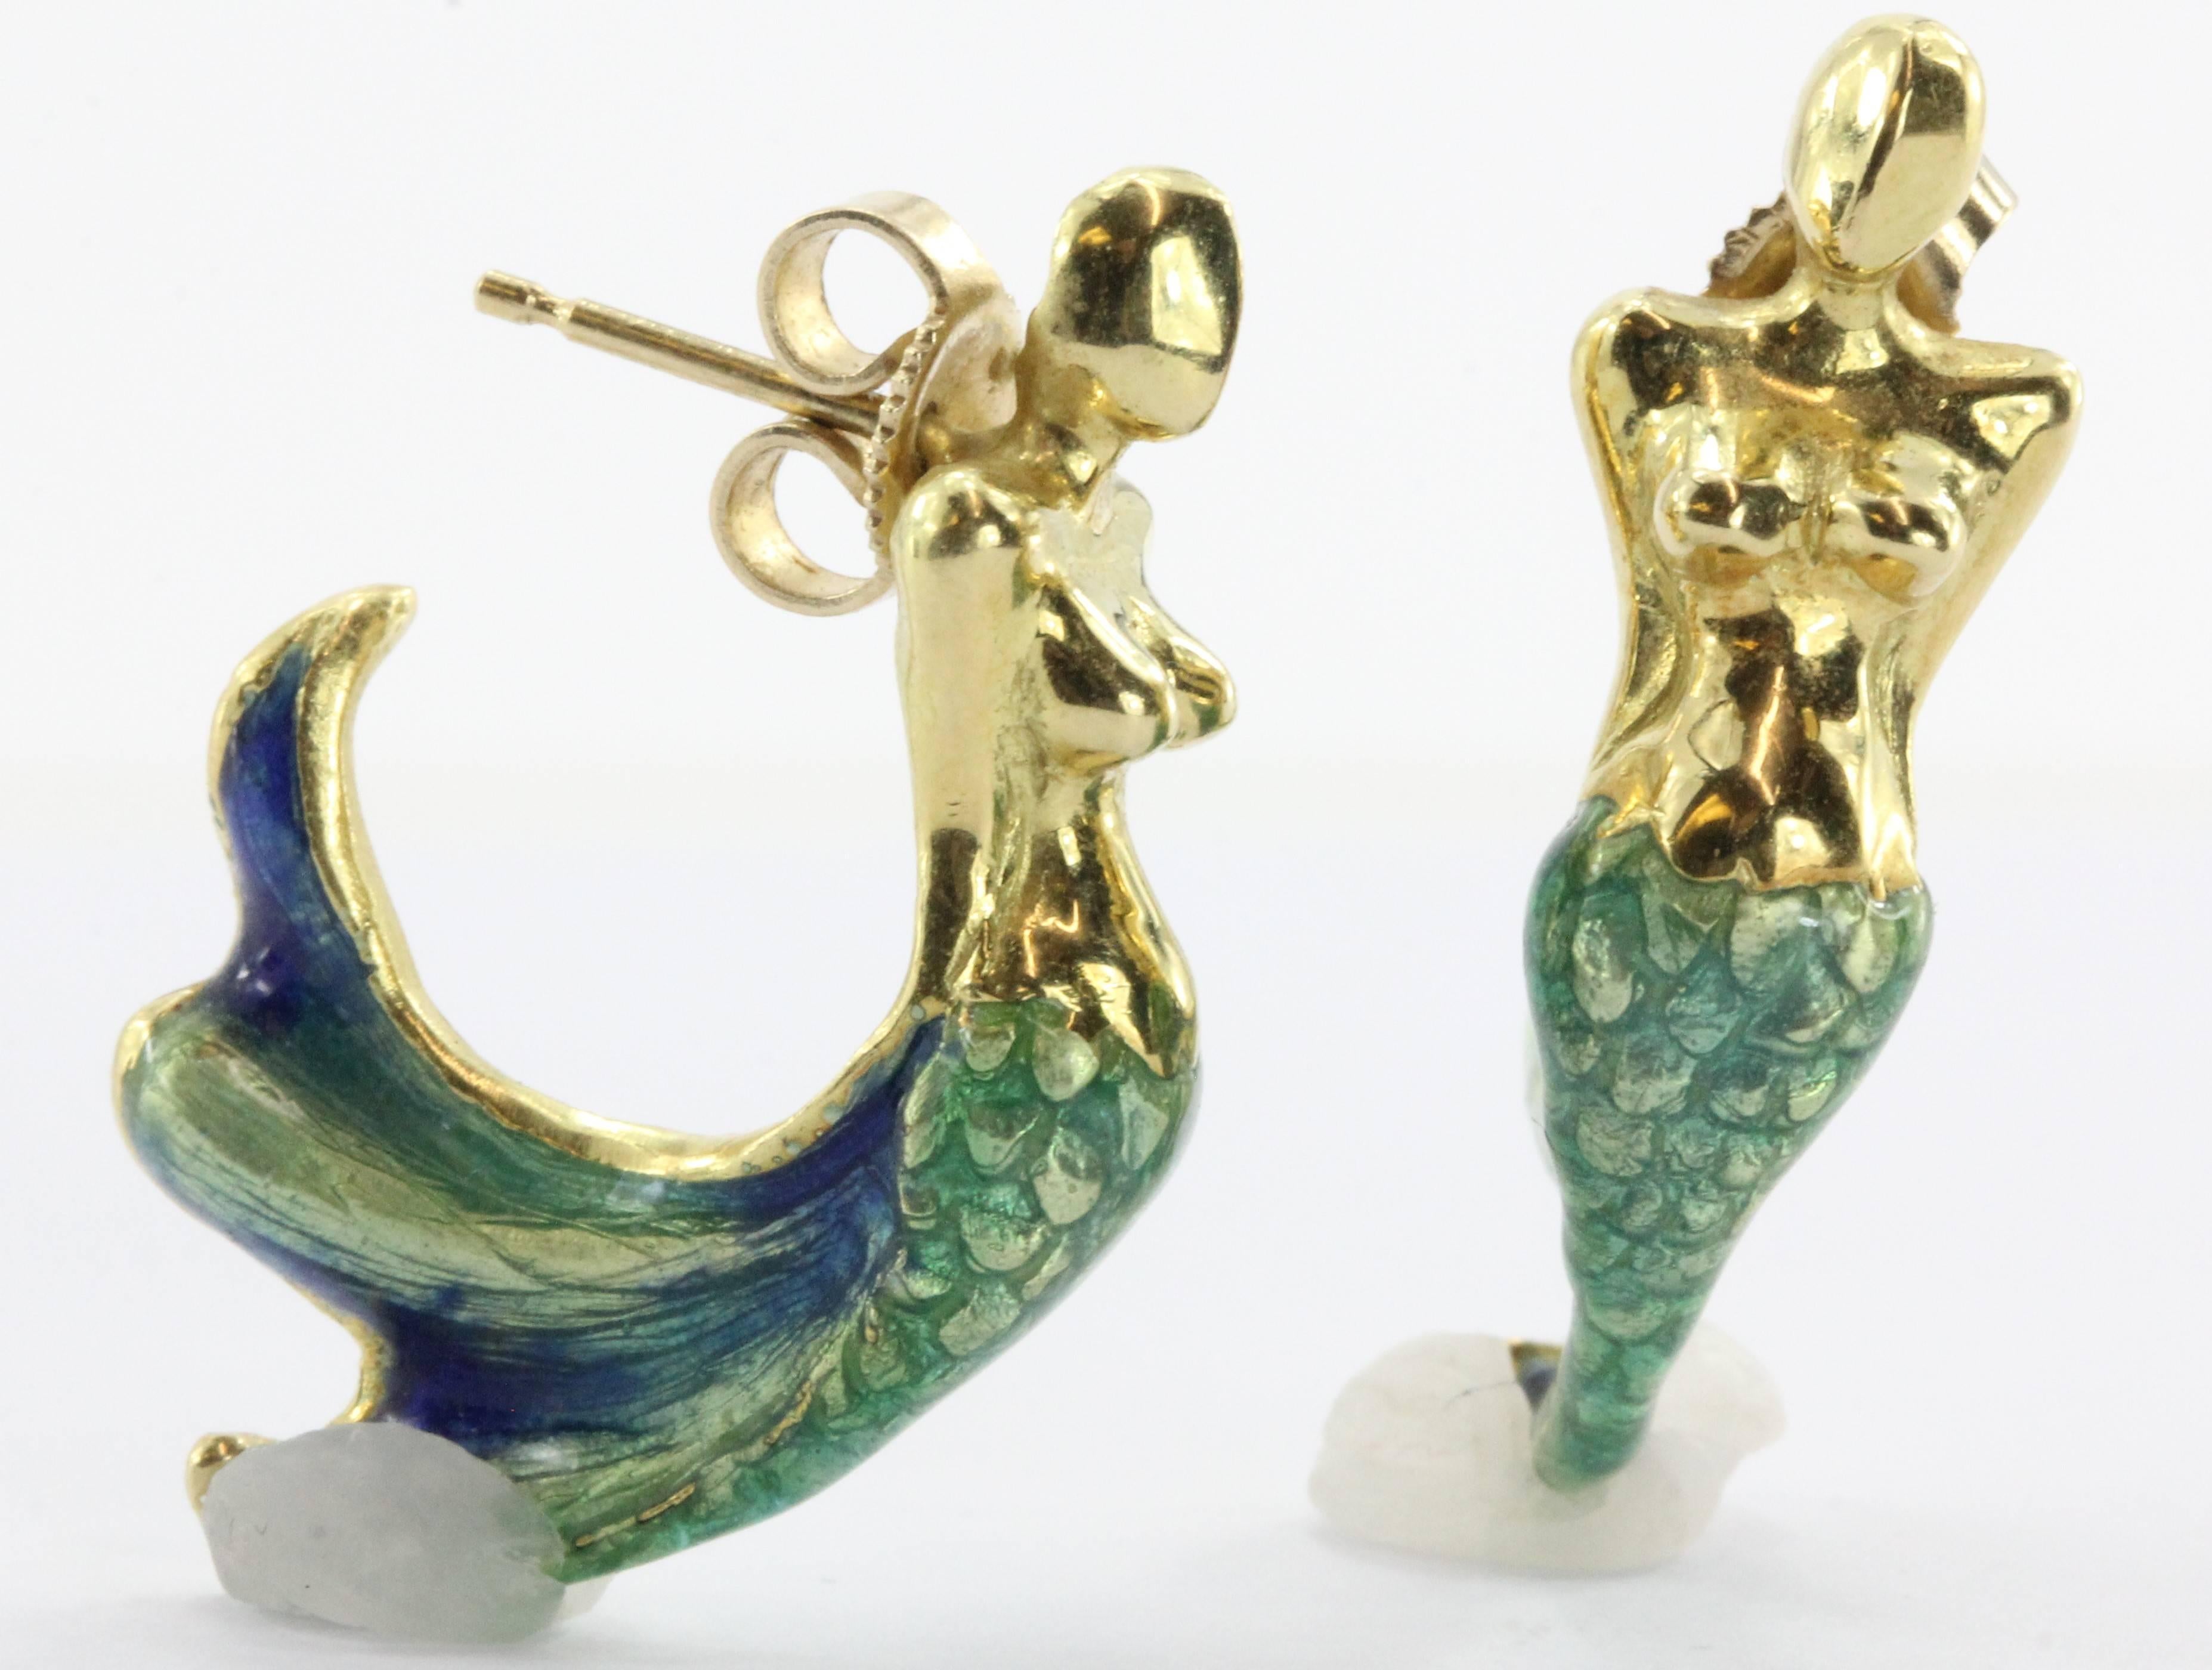 18K Gold  Blue & Green Enamel Figural Mermaid Earrings Signed. The earrings are in excellent estate condition and ready to wear. There are no cracks, chips or scratches to the enamel. The 14K gold backs are not original to the piece. The earrings